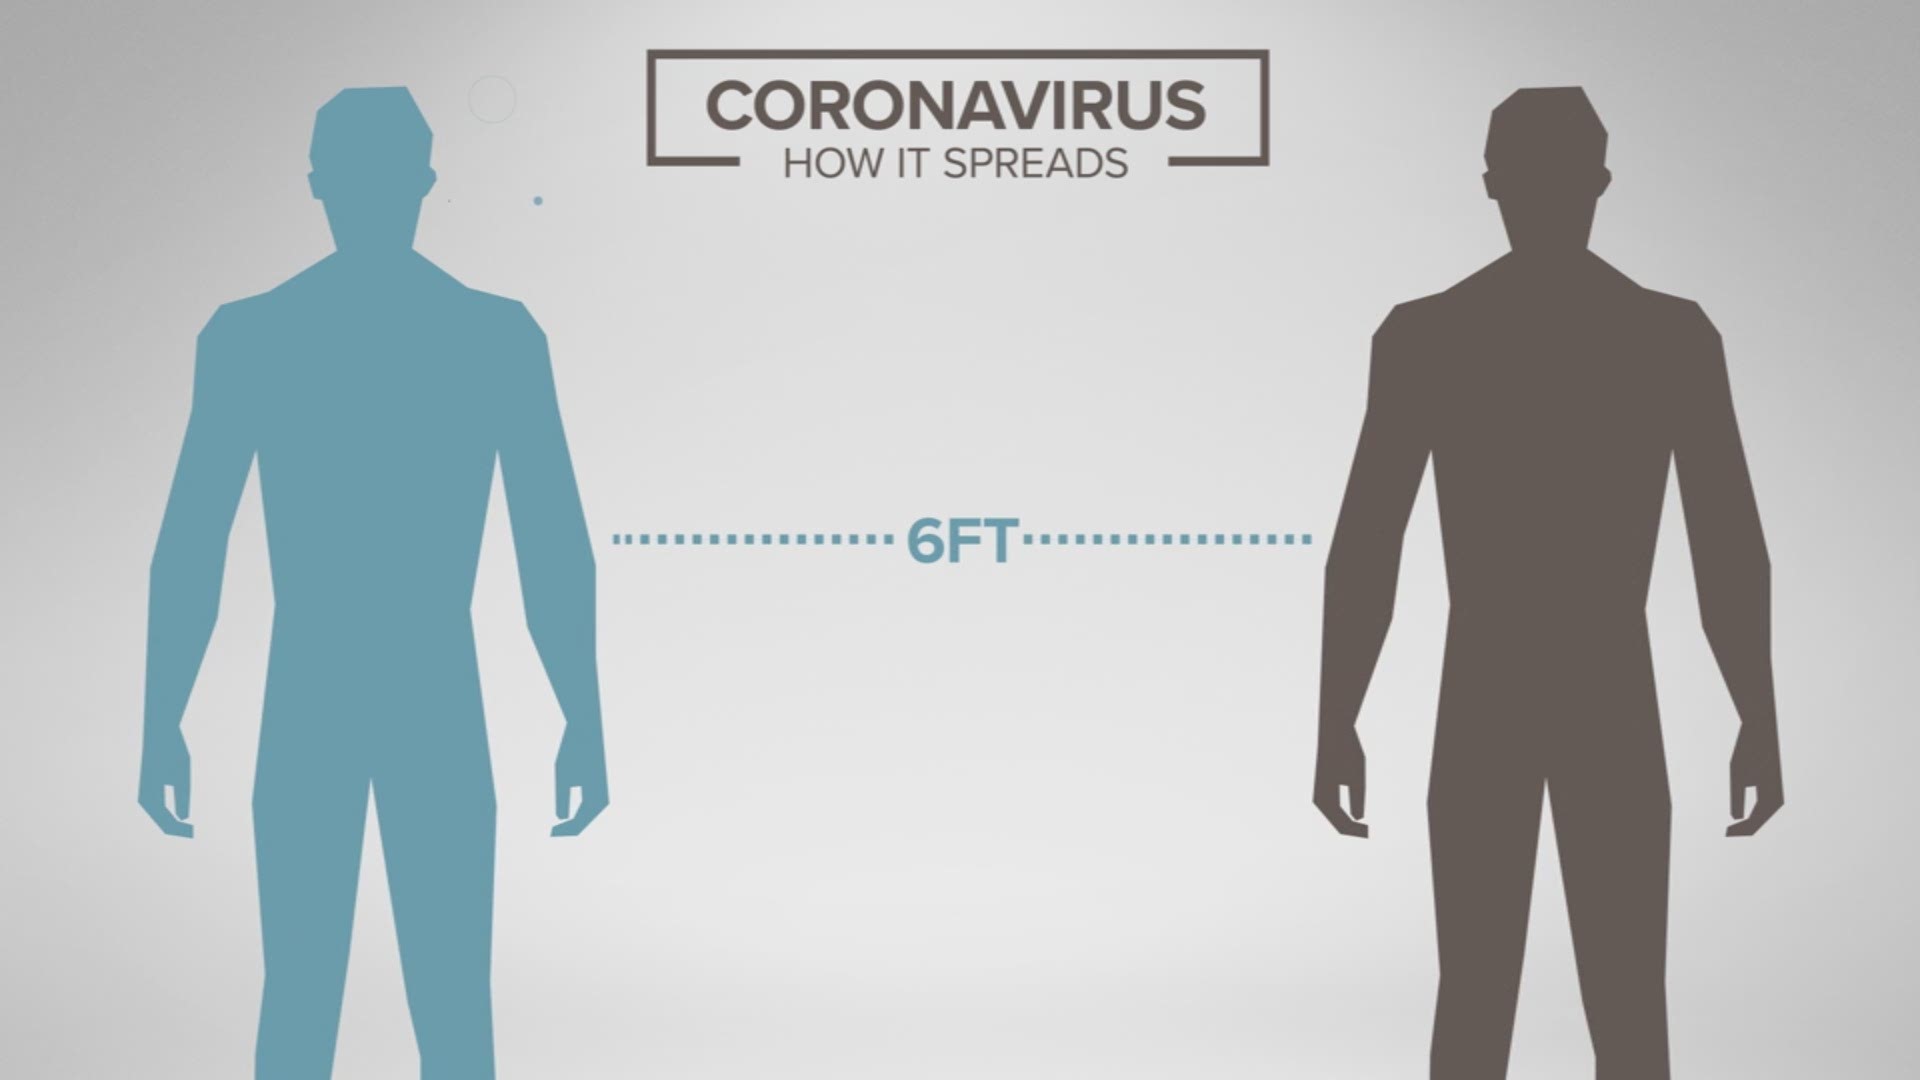 A closer look at how the coronavirus spreads. Here's what you need to know.